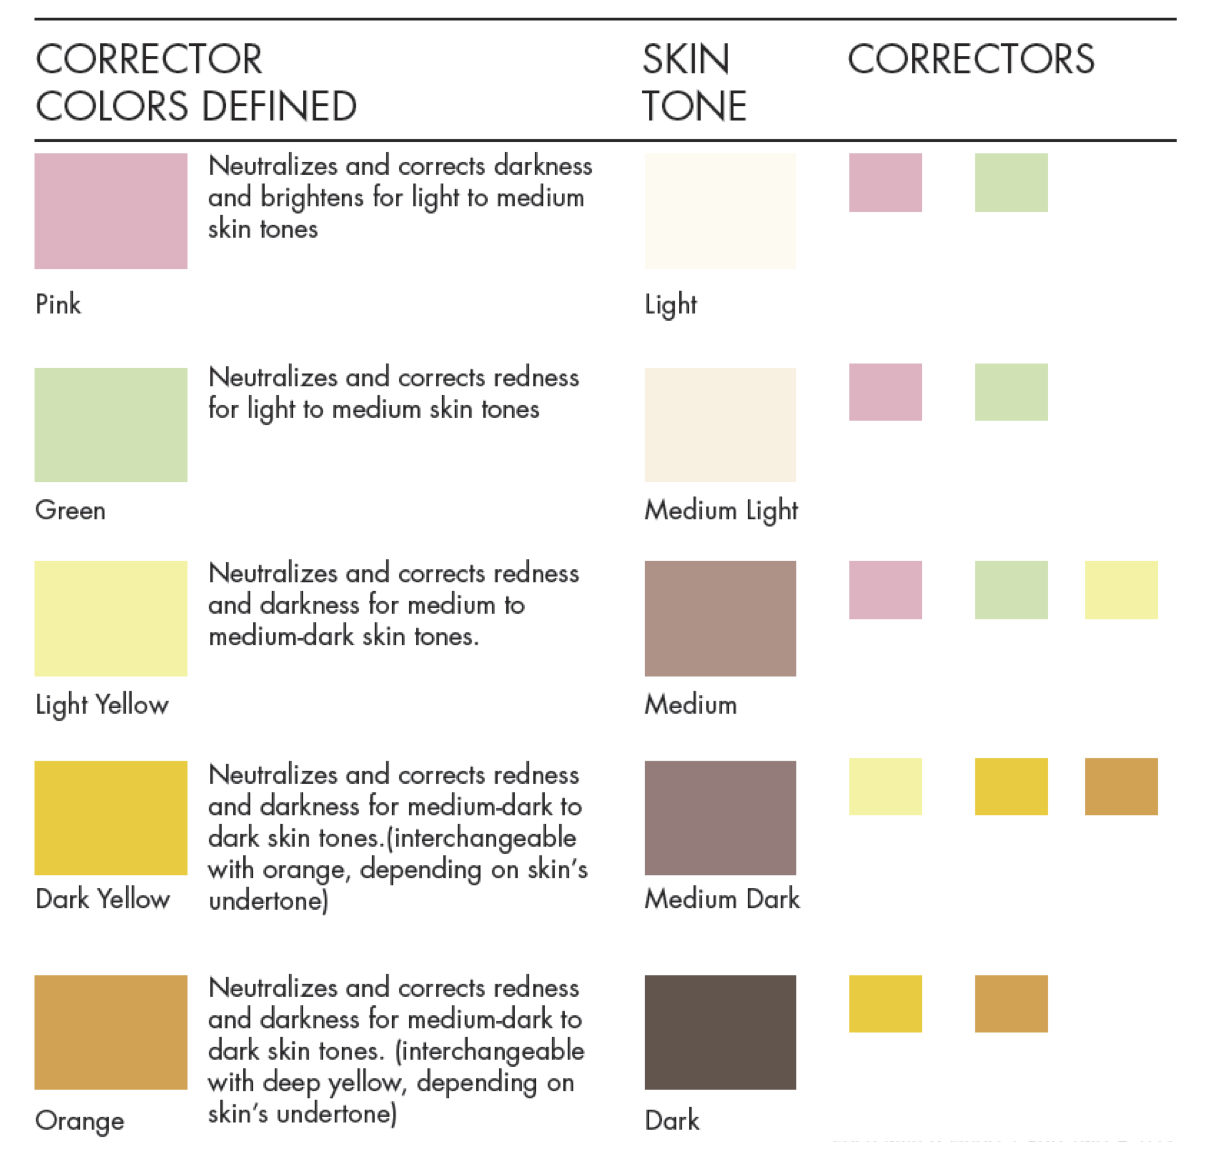 Color Correcting Concealer Chart